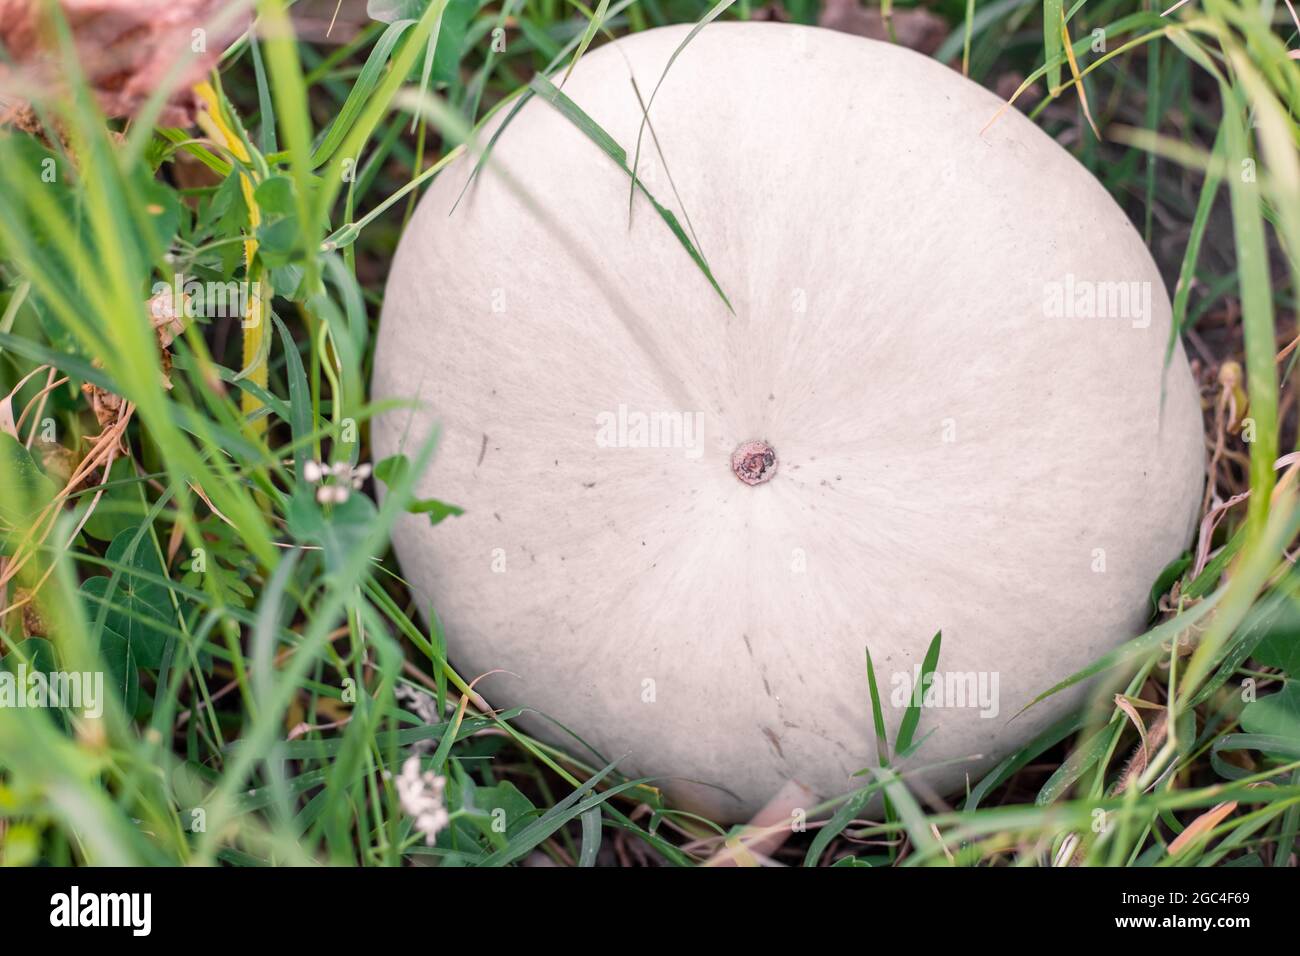 A large white pumpkin grows on a bush in a vegetable garden. Growing tasty healthy vegetables. Stock Photo